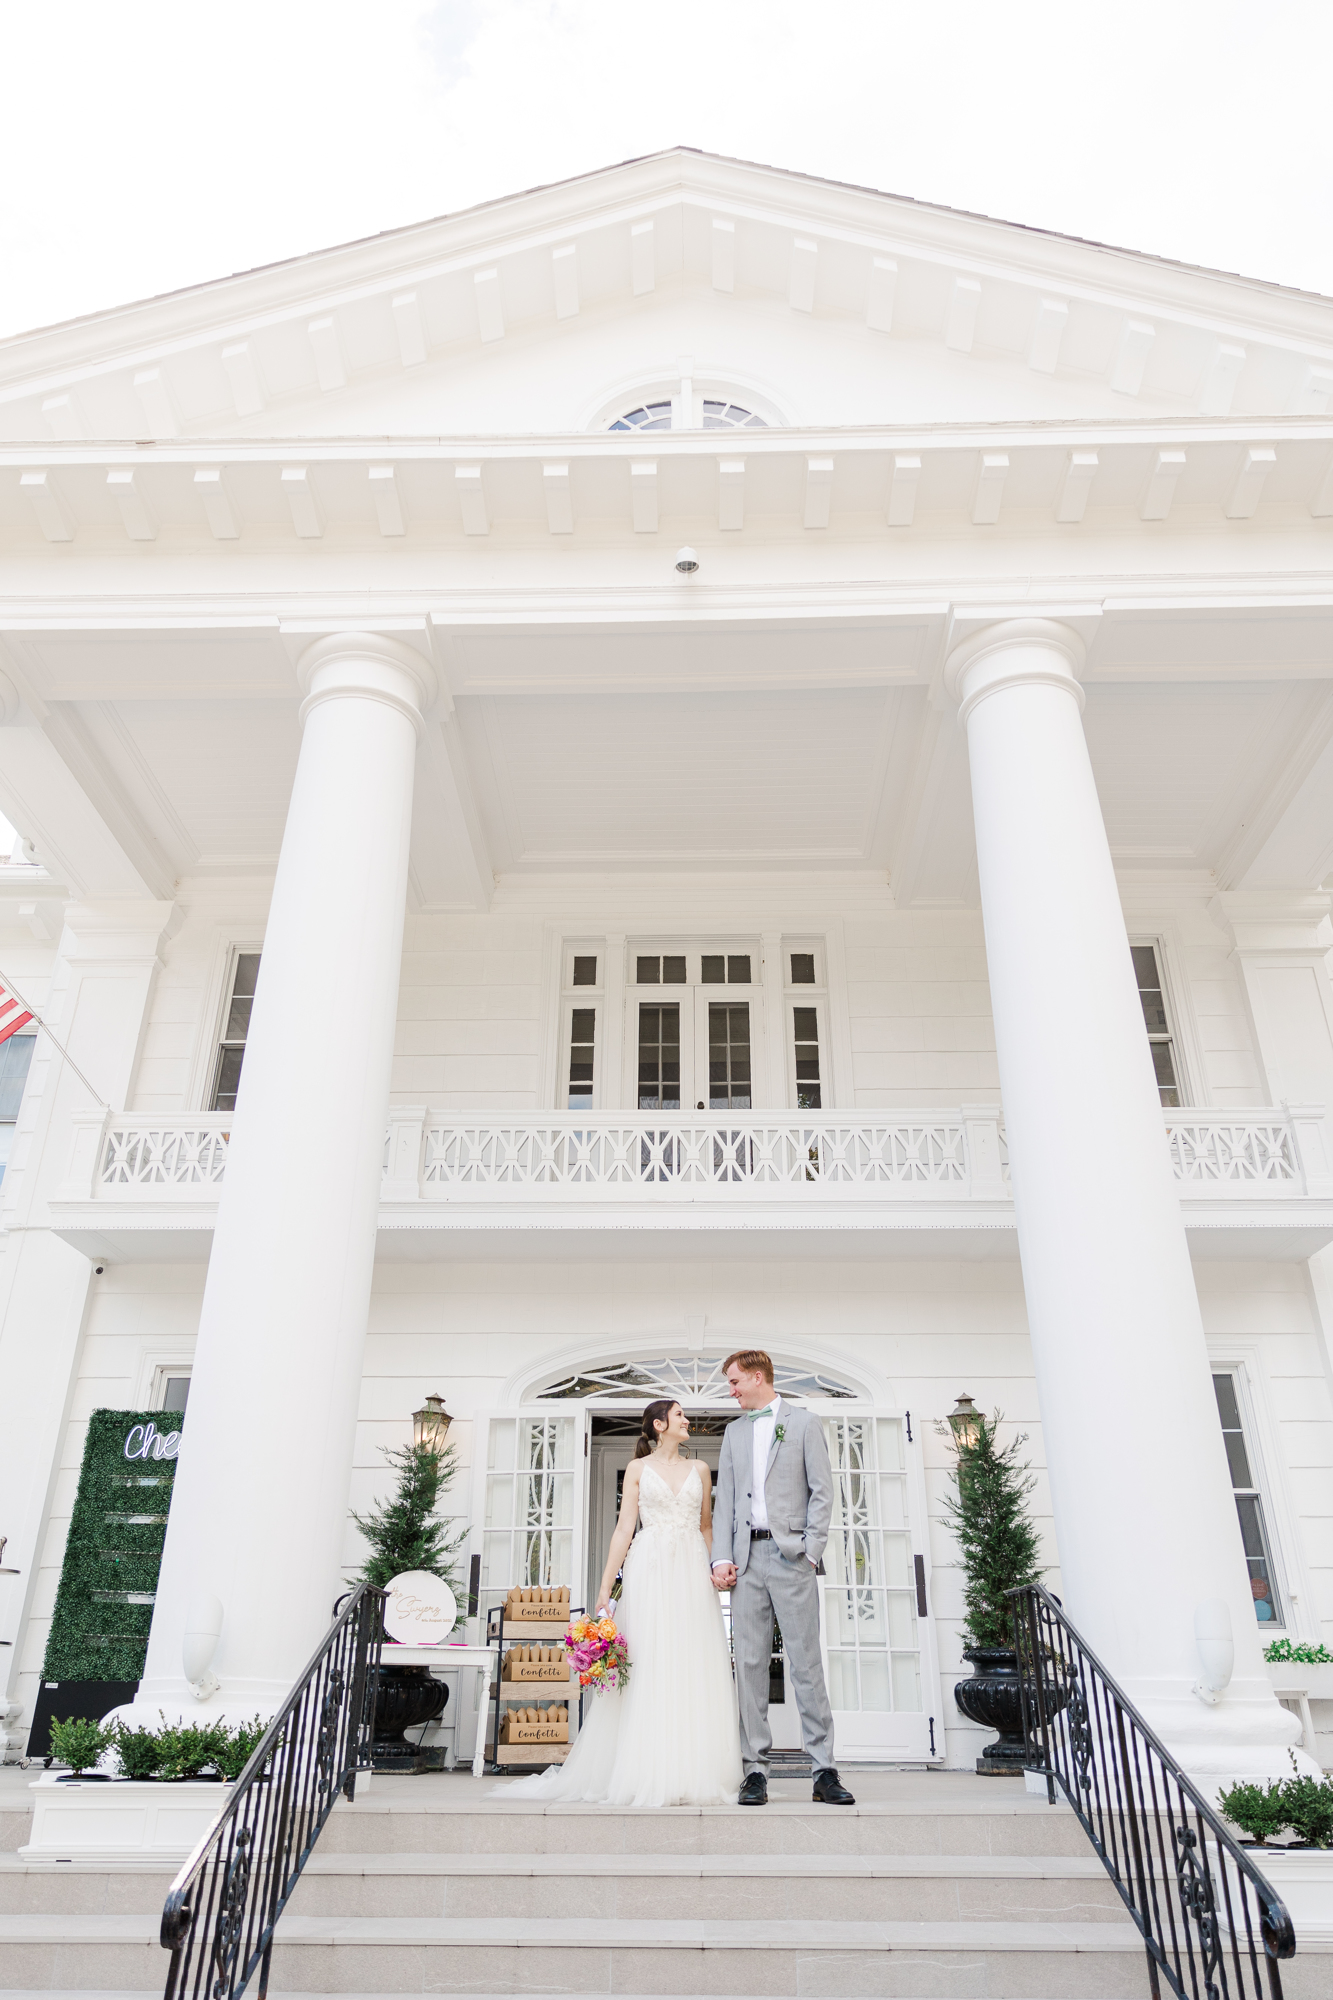 Unique Wedding at Briarcliff Manor in Westchester County